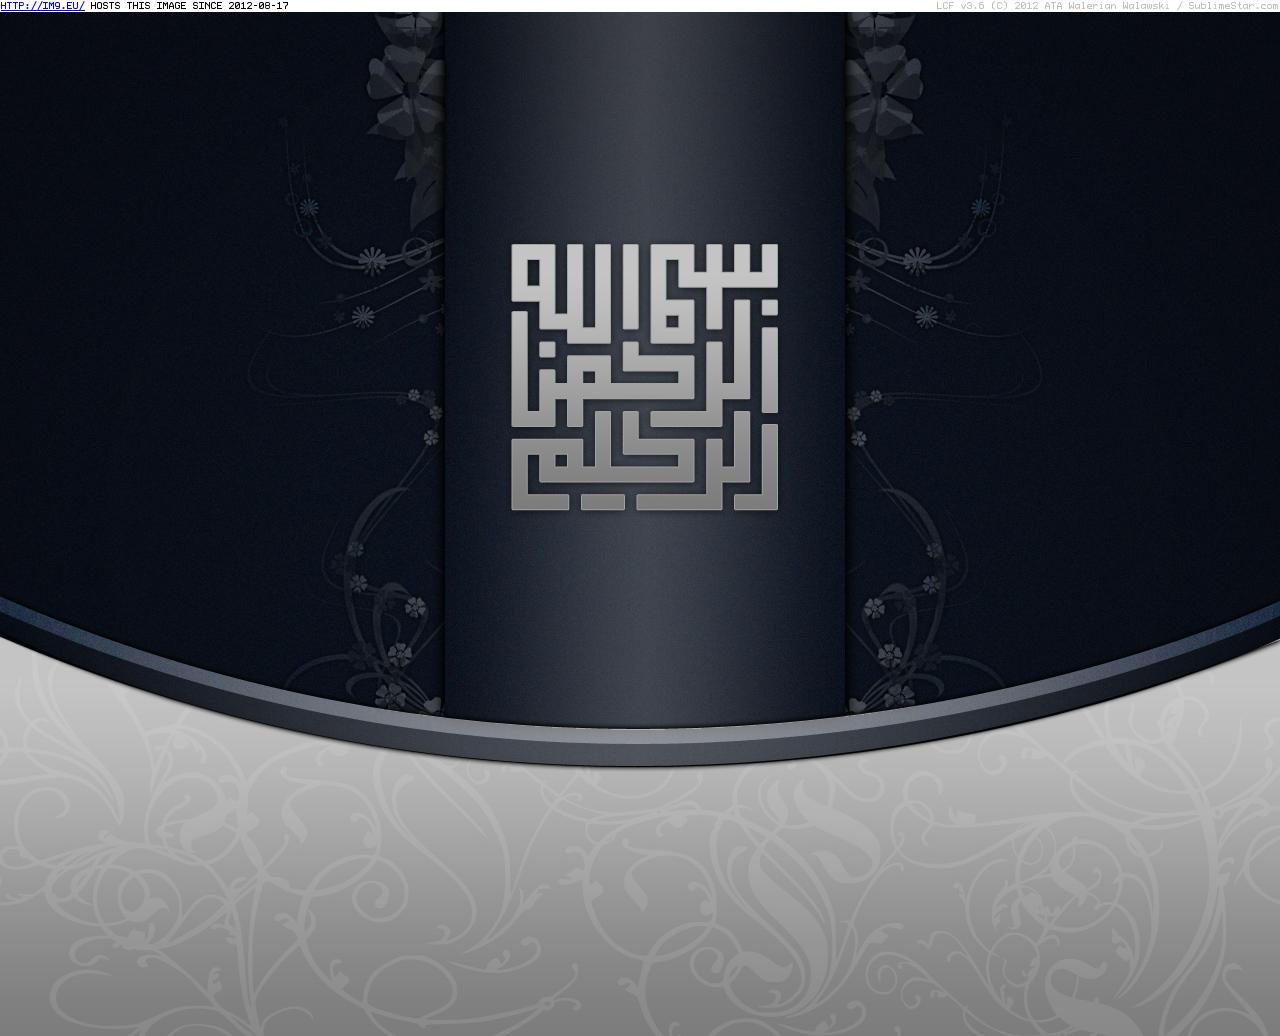 Besm Allah (in Islamic Wallpapers and Images)